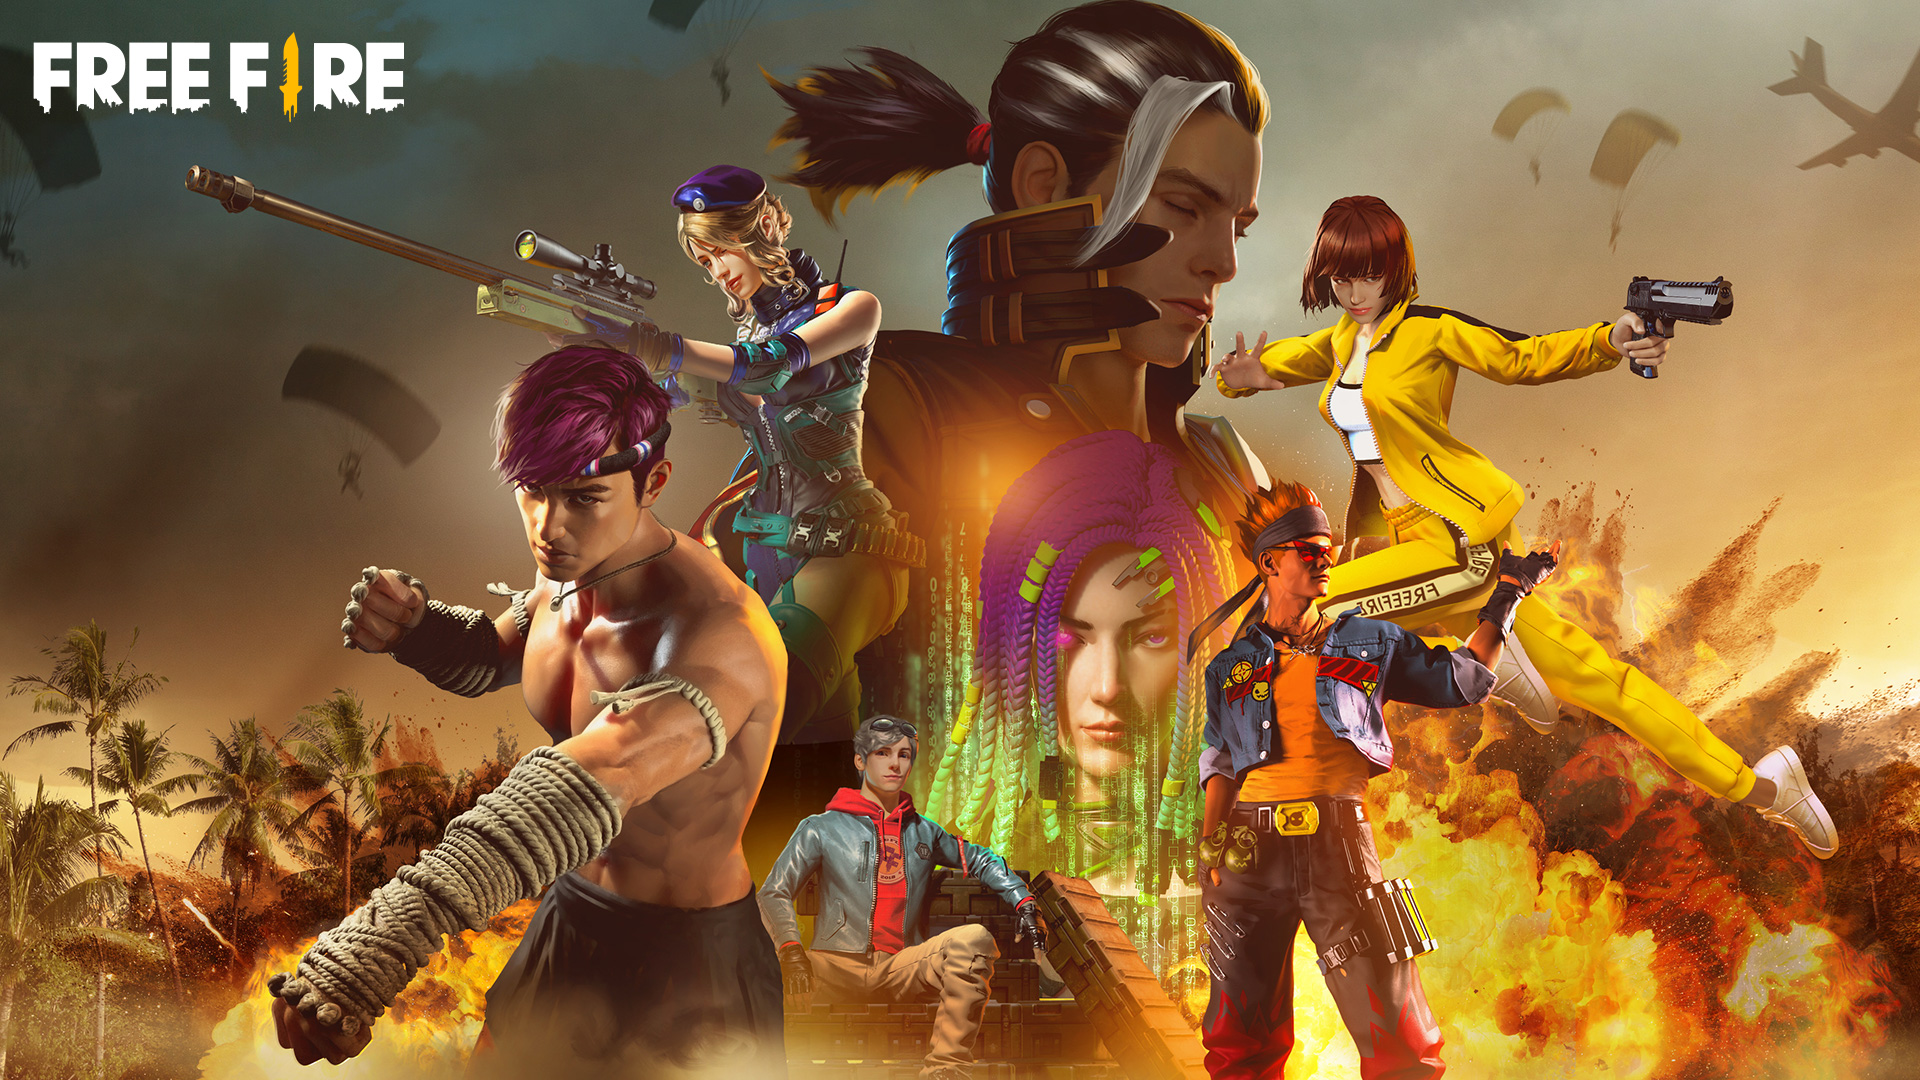 Free Fire redeem codes released in July 2021: Rewards and codes listed